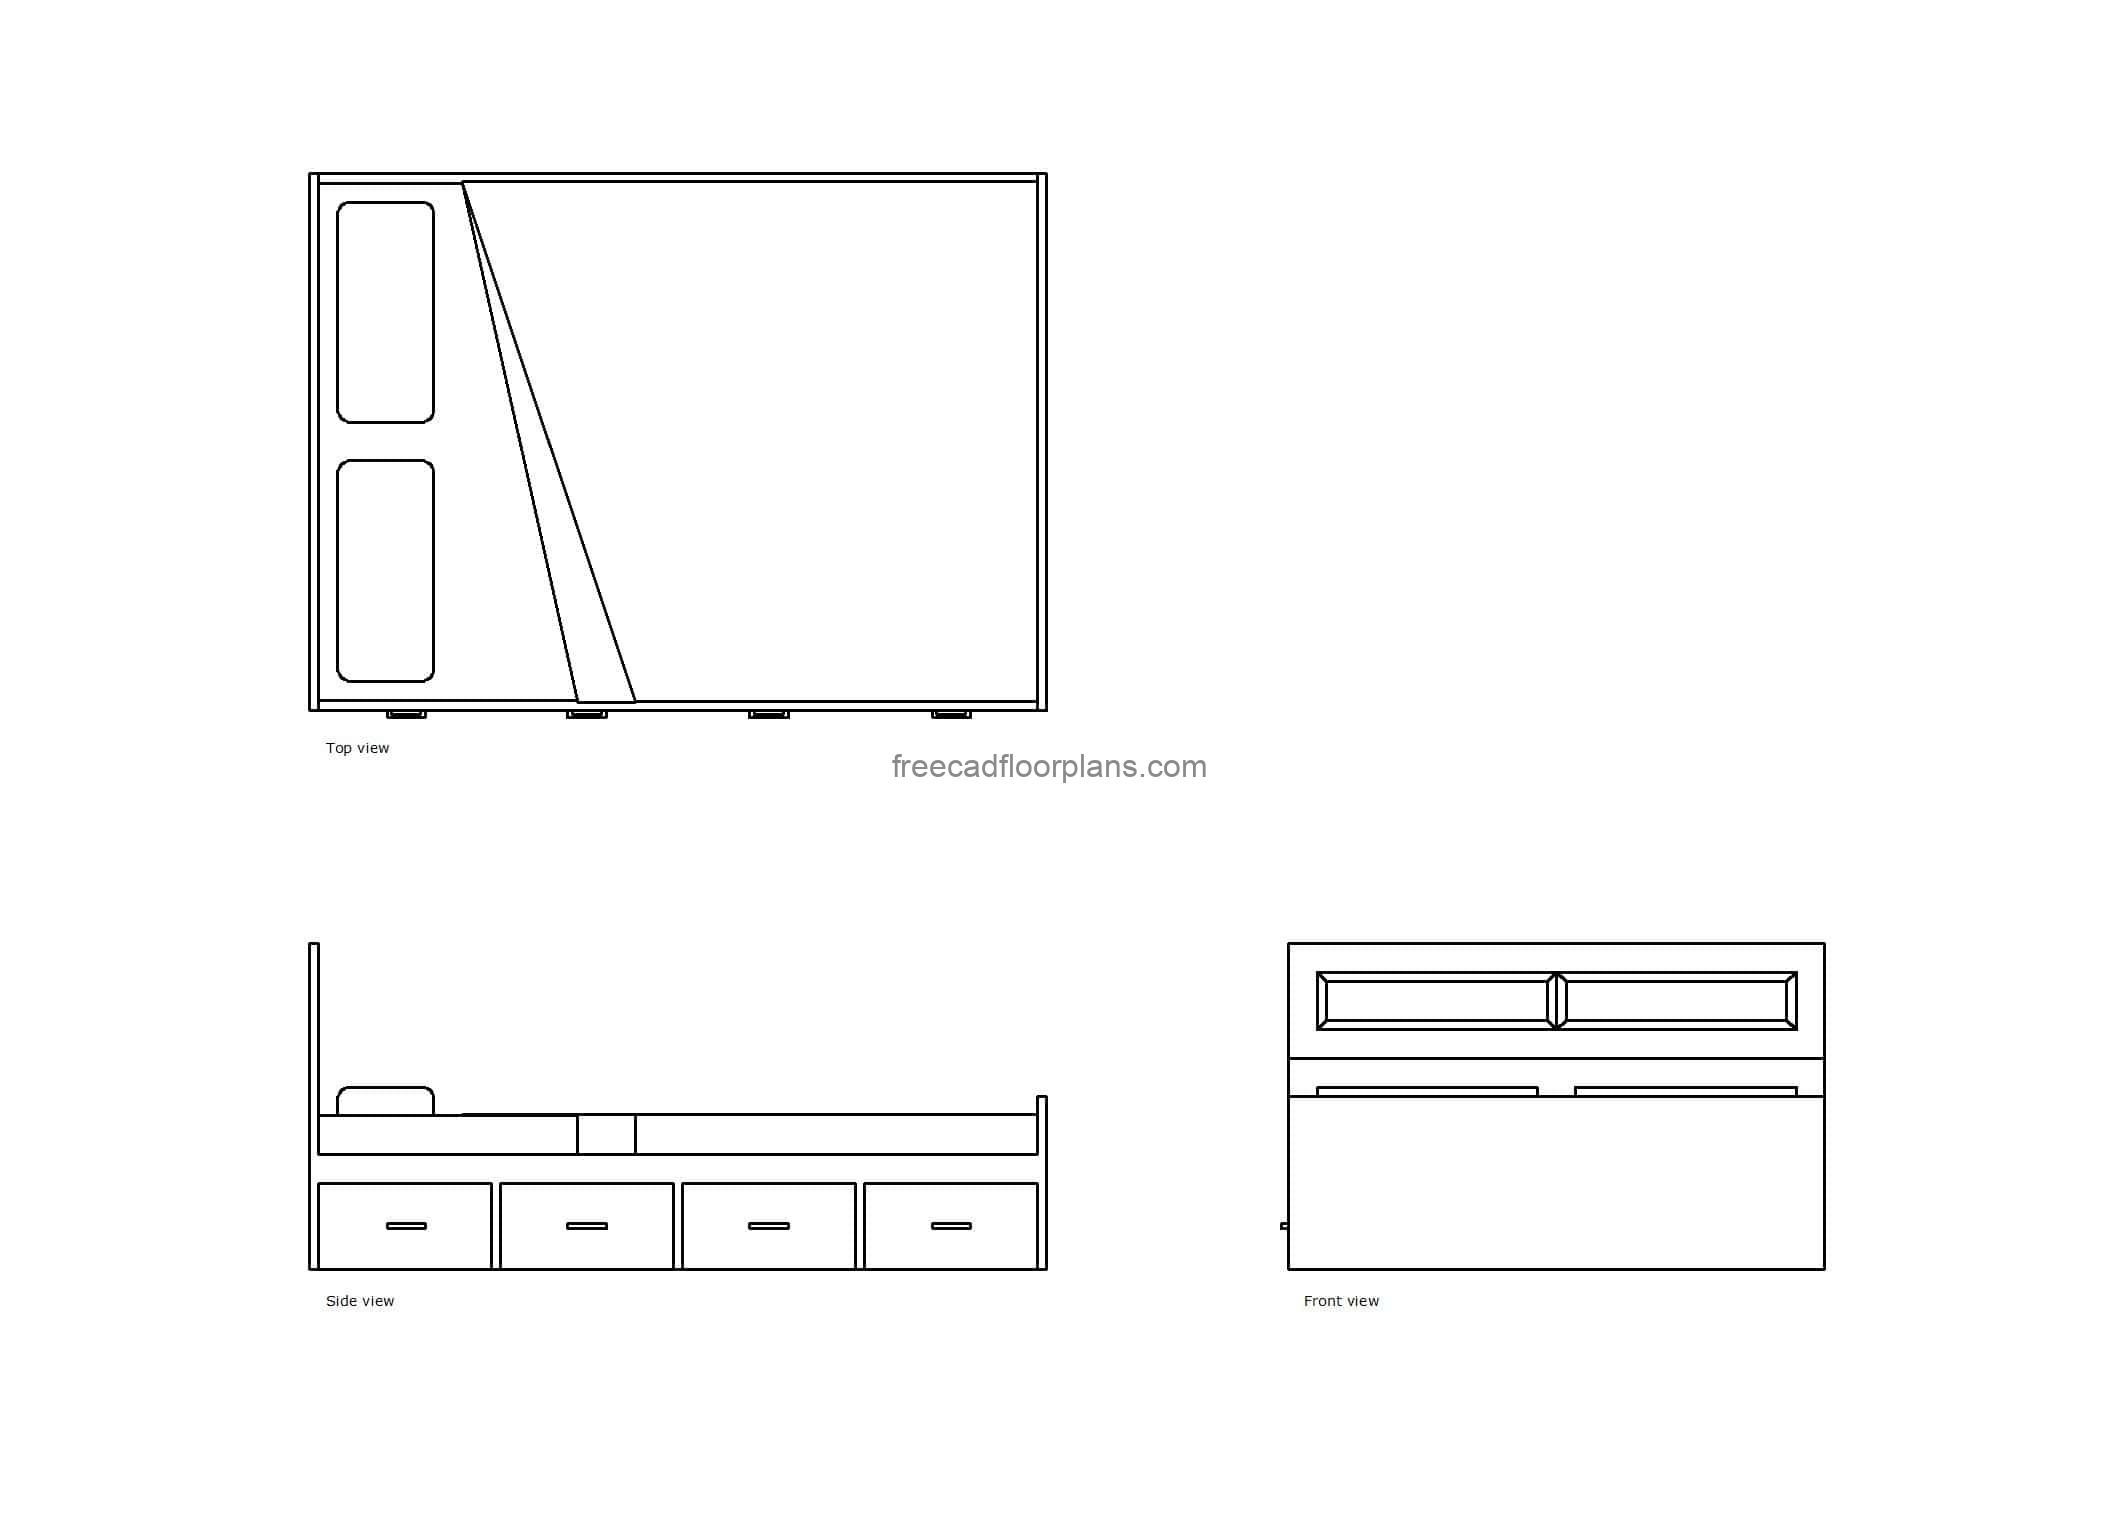 autocad drawing of a modern twin bed, plan and elevation 2d views, dwg file free for download